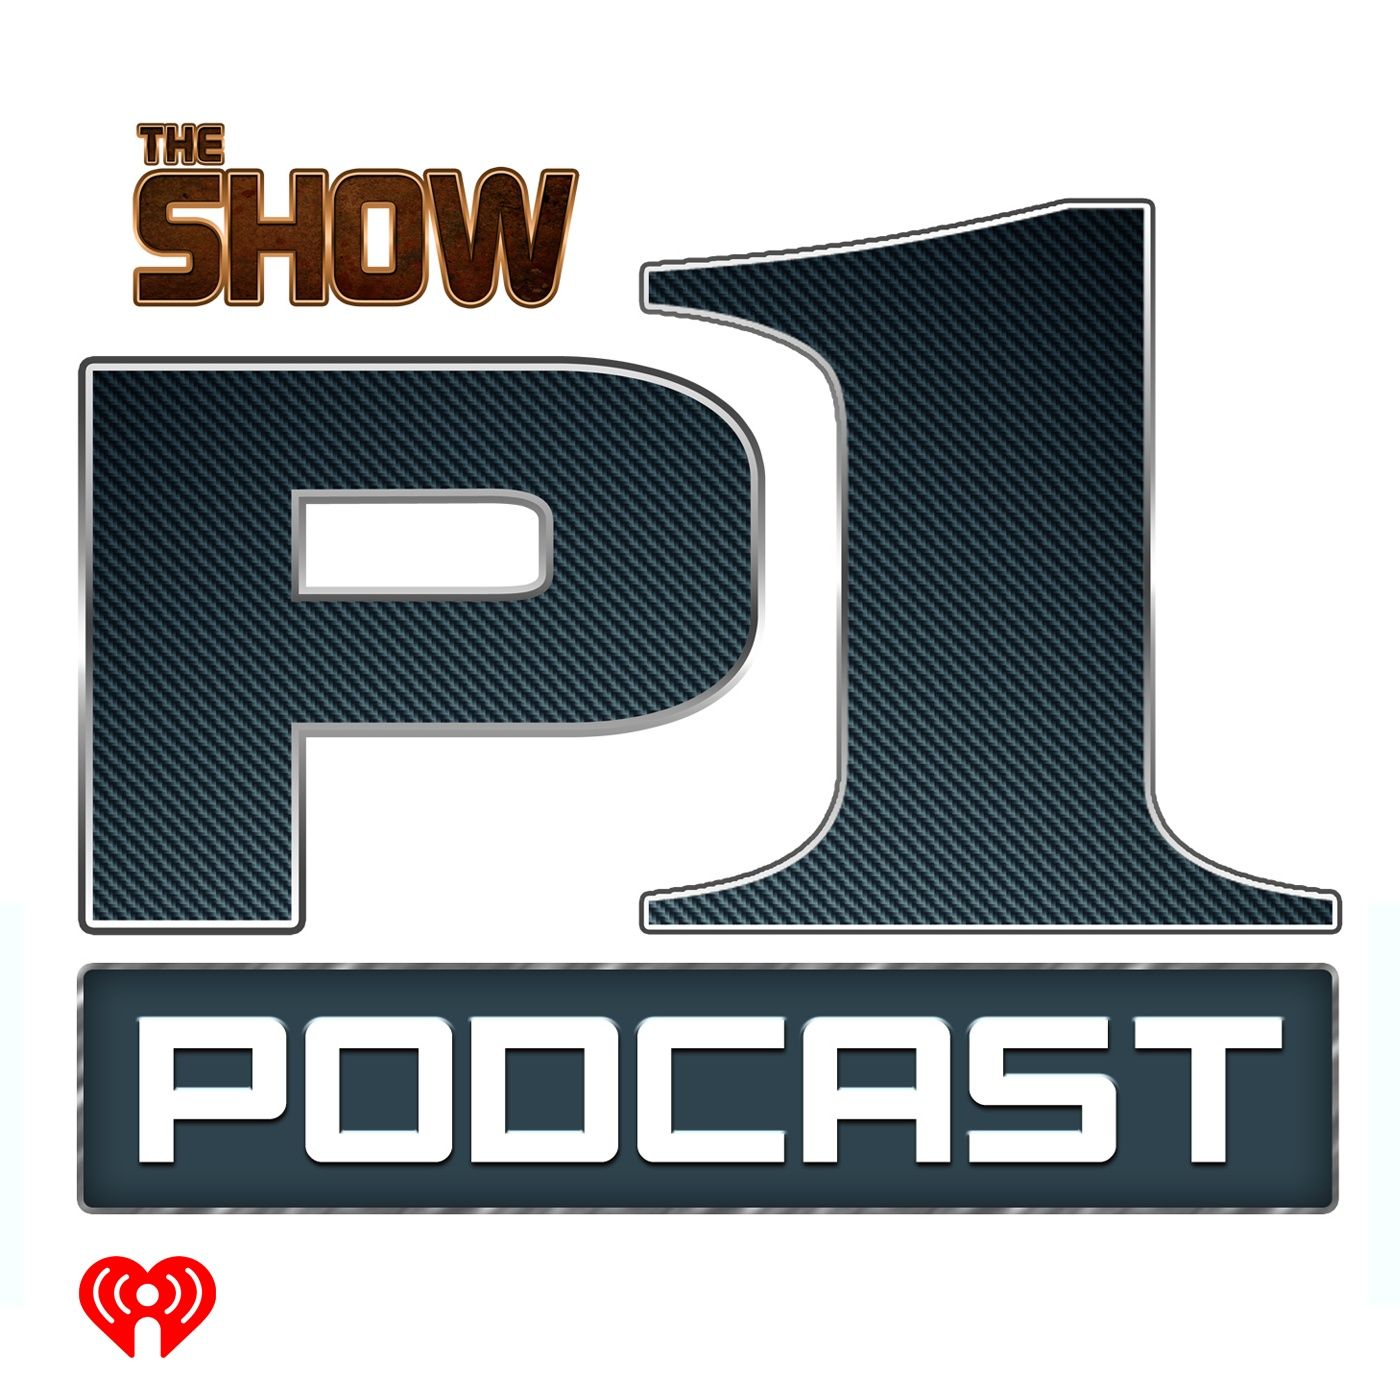 The Show Presents The P1 Podcast